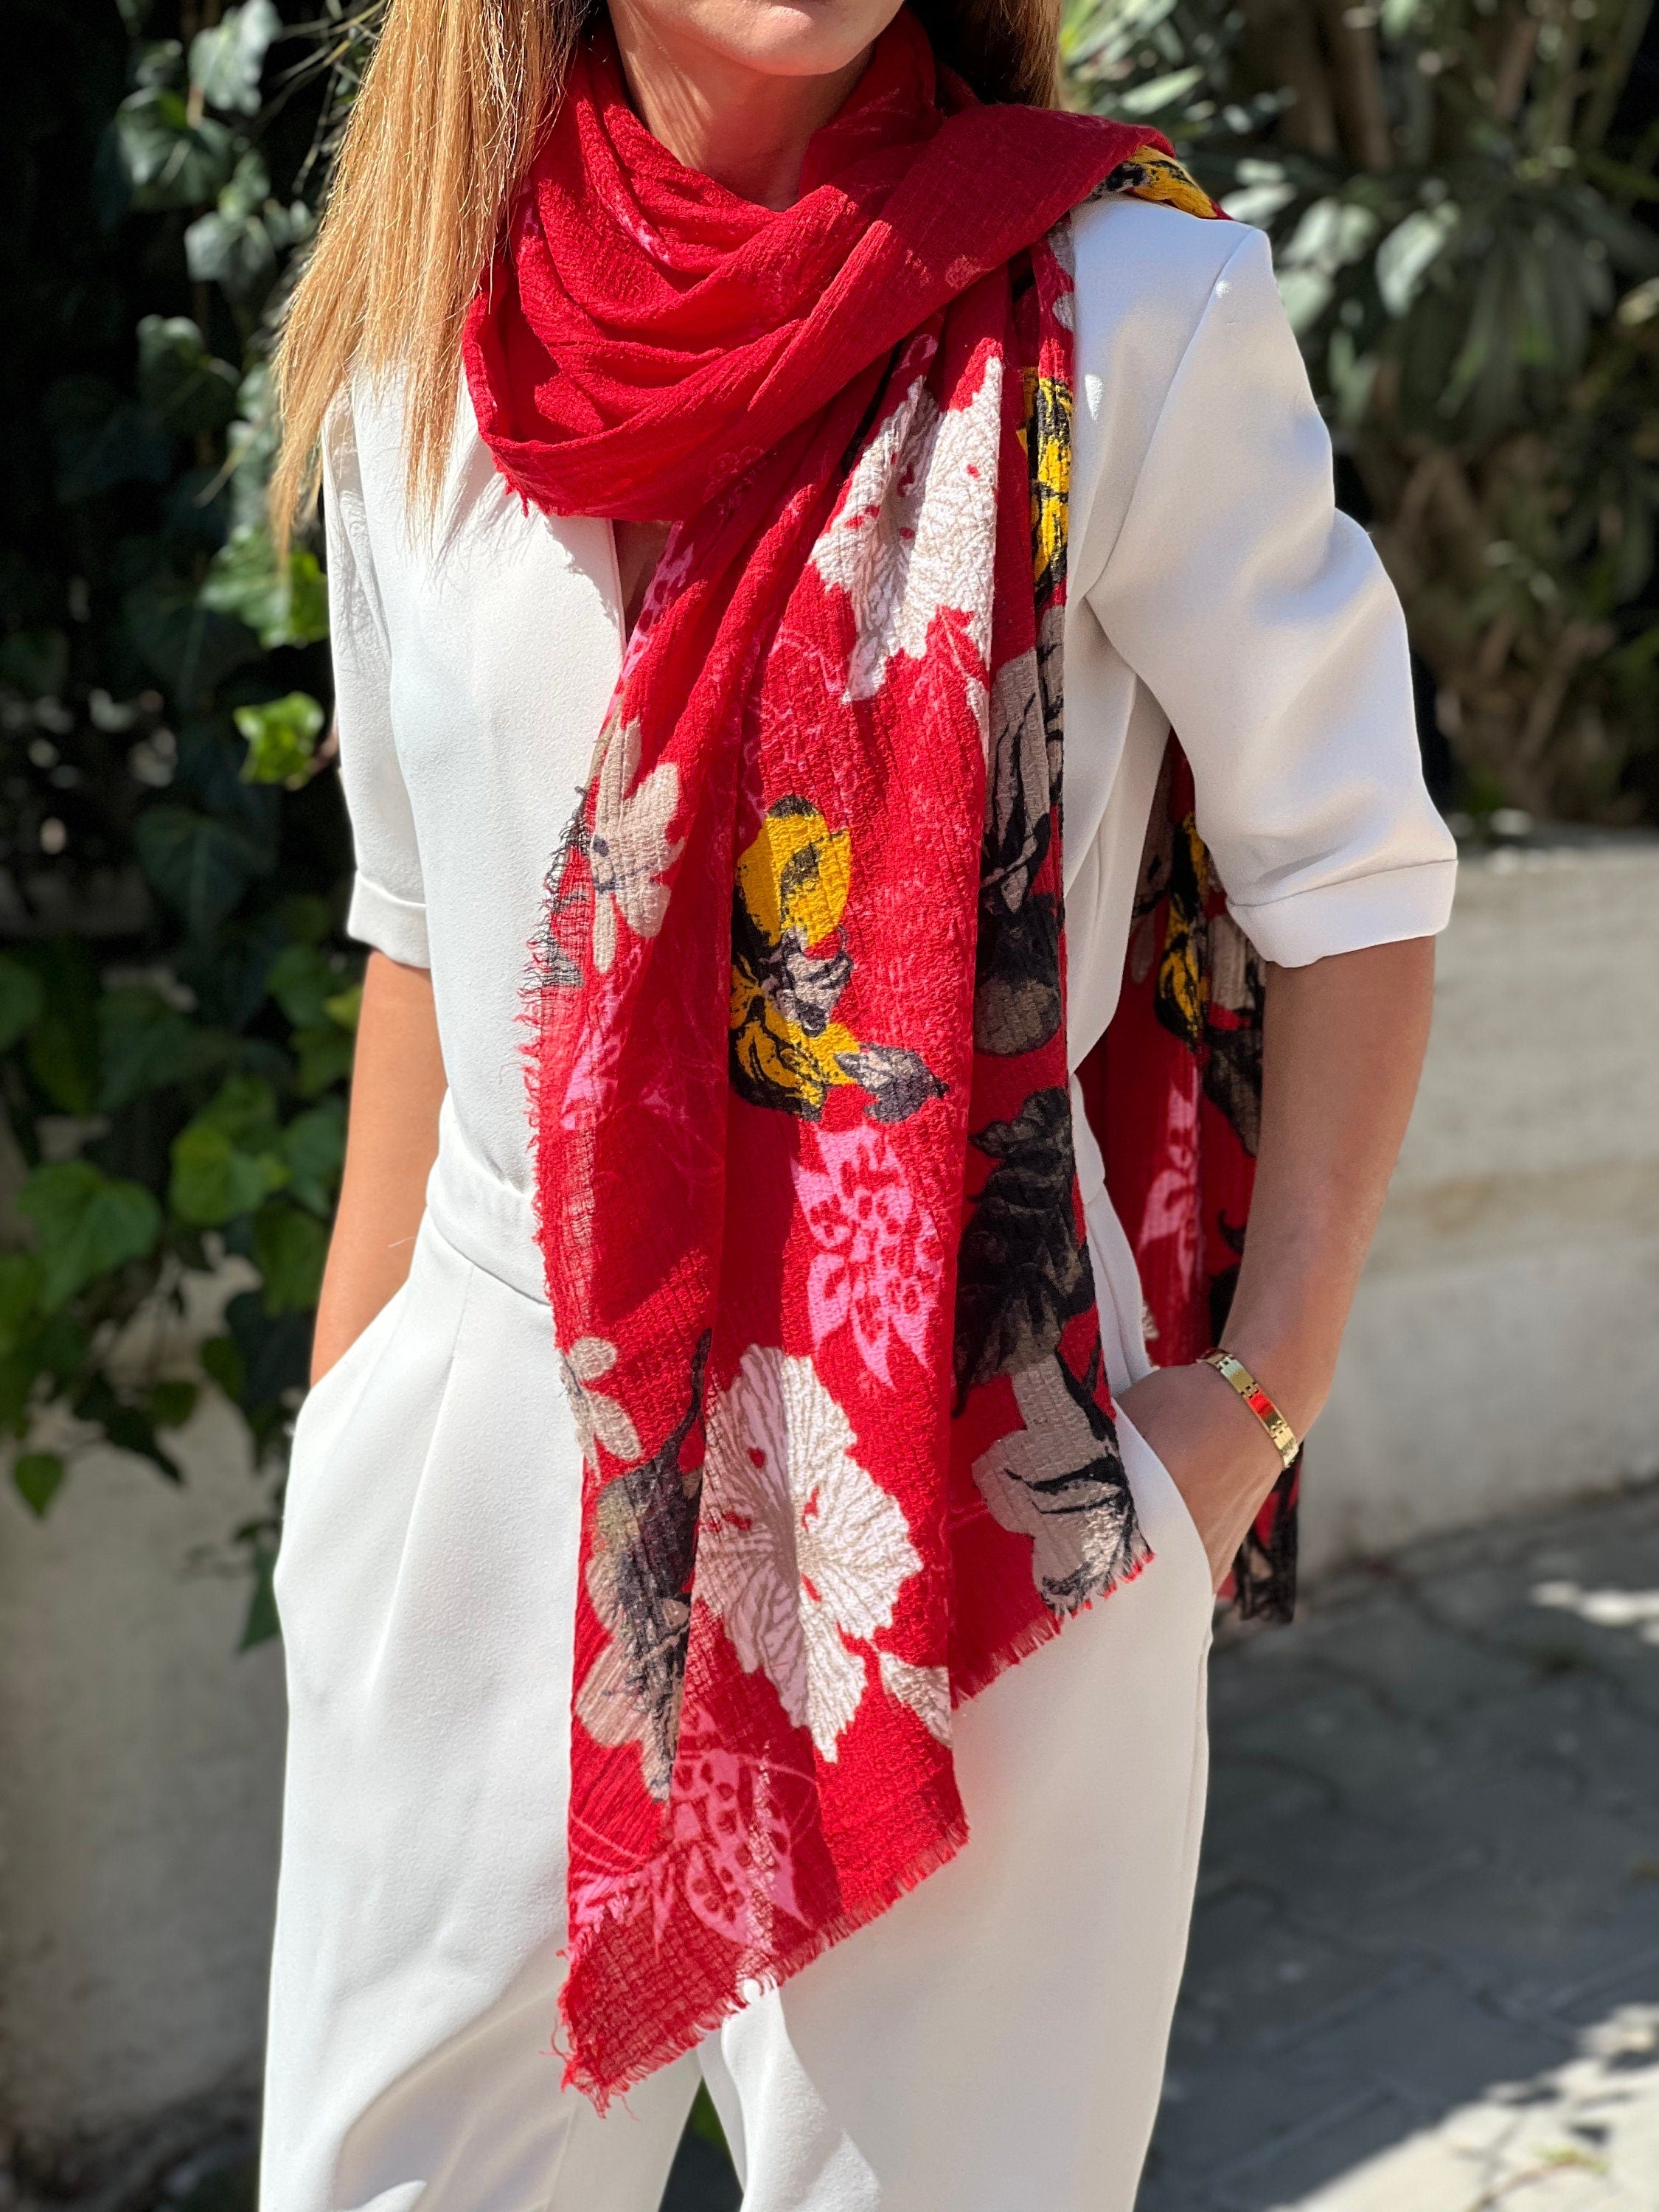 Give the gift of fashion and style with this stunning Cotton Floral Scarf - she&#39;ll love it!